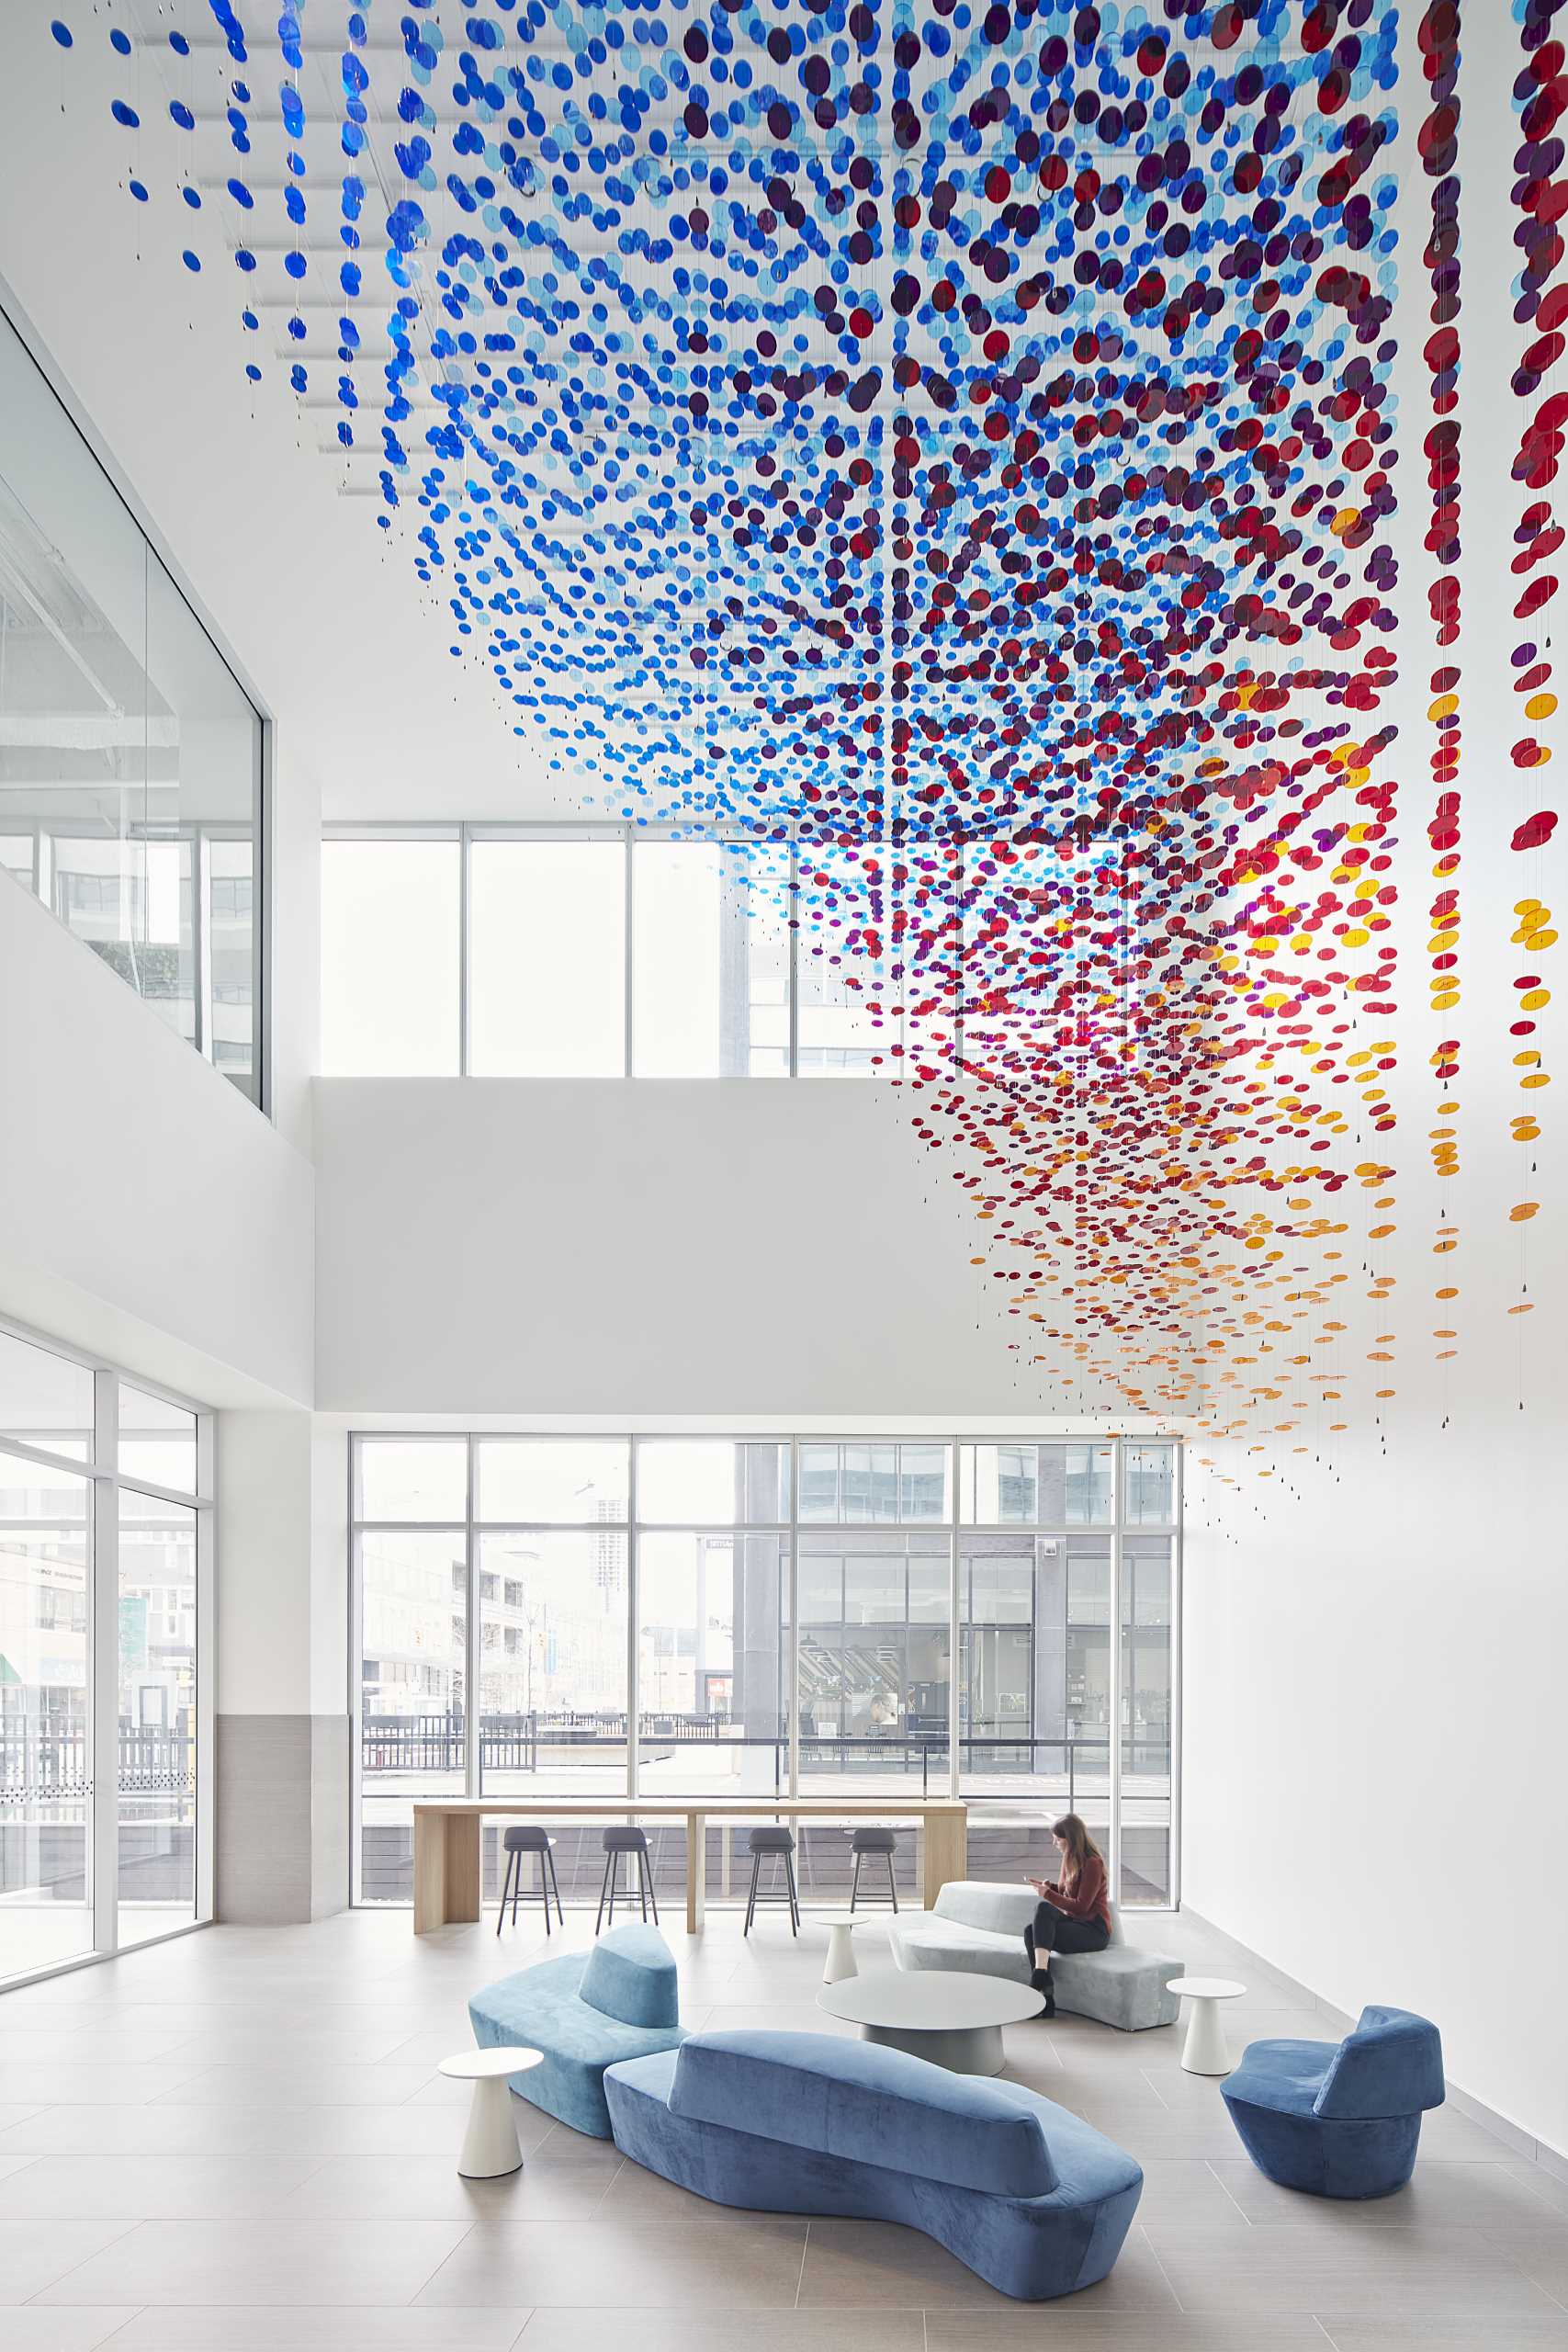 A custom-installation in a lobby atrium is made from 8,000 colorful discs suspended from 650 wire cables.